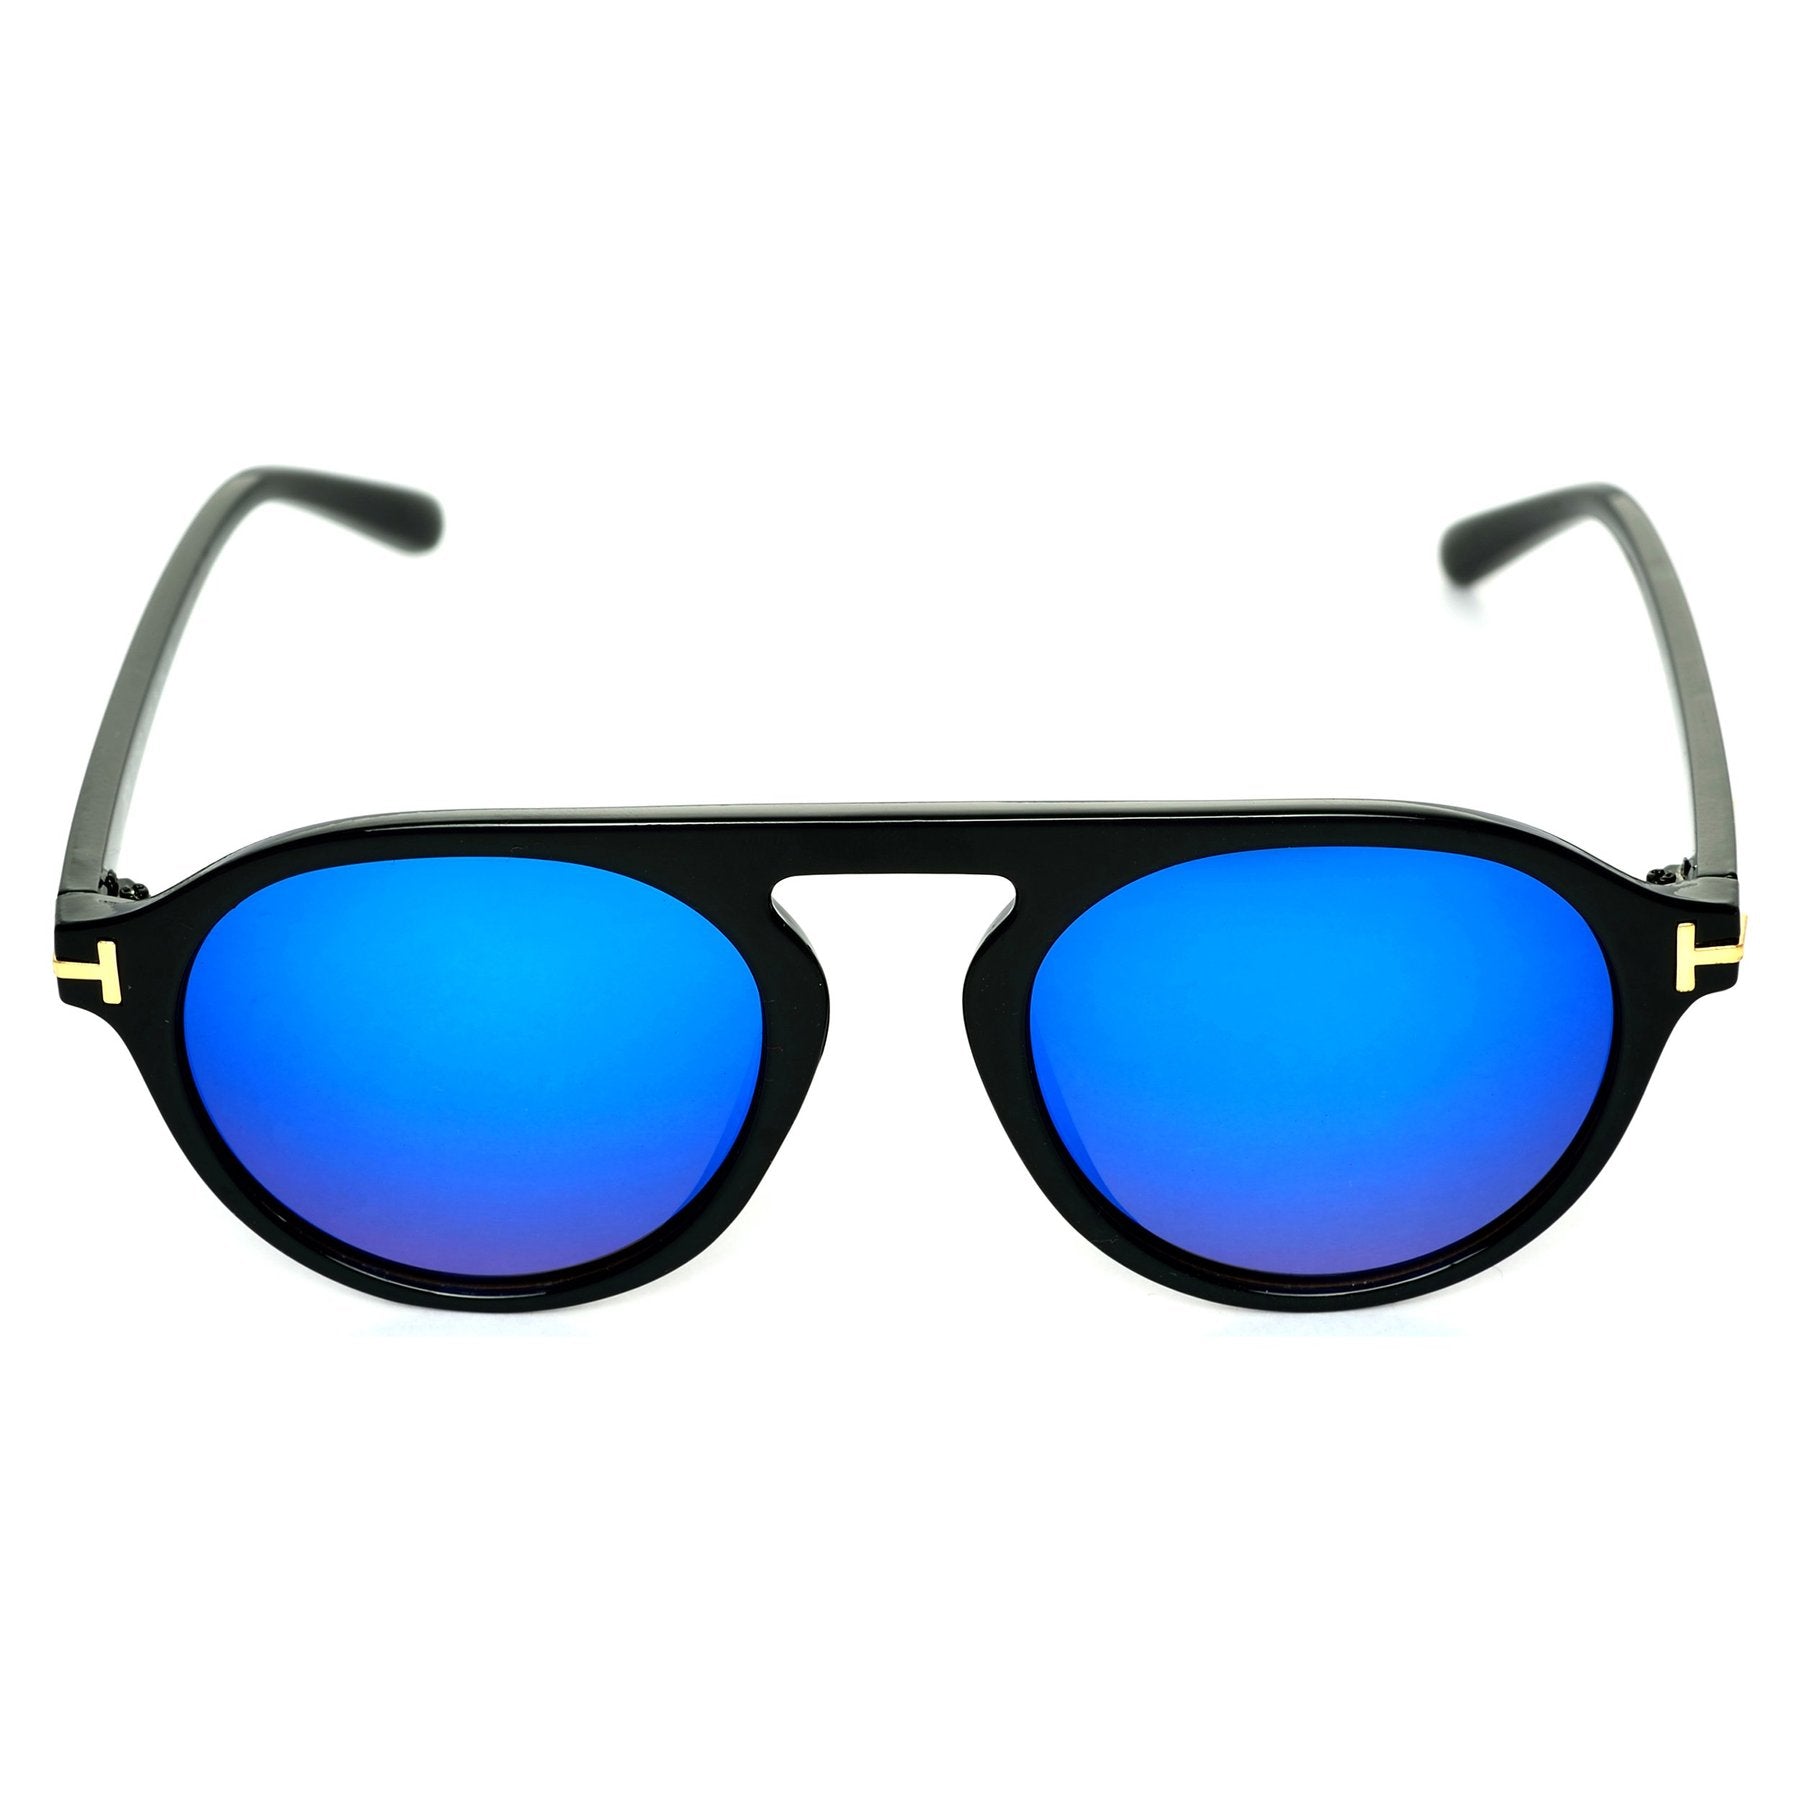 Round Blue And Black Sunglasses For Men And Women-FunkyTradition